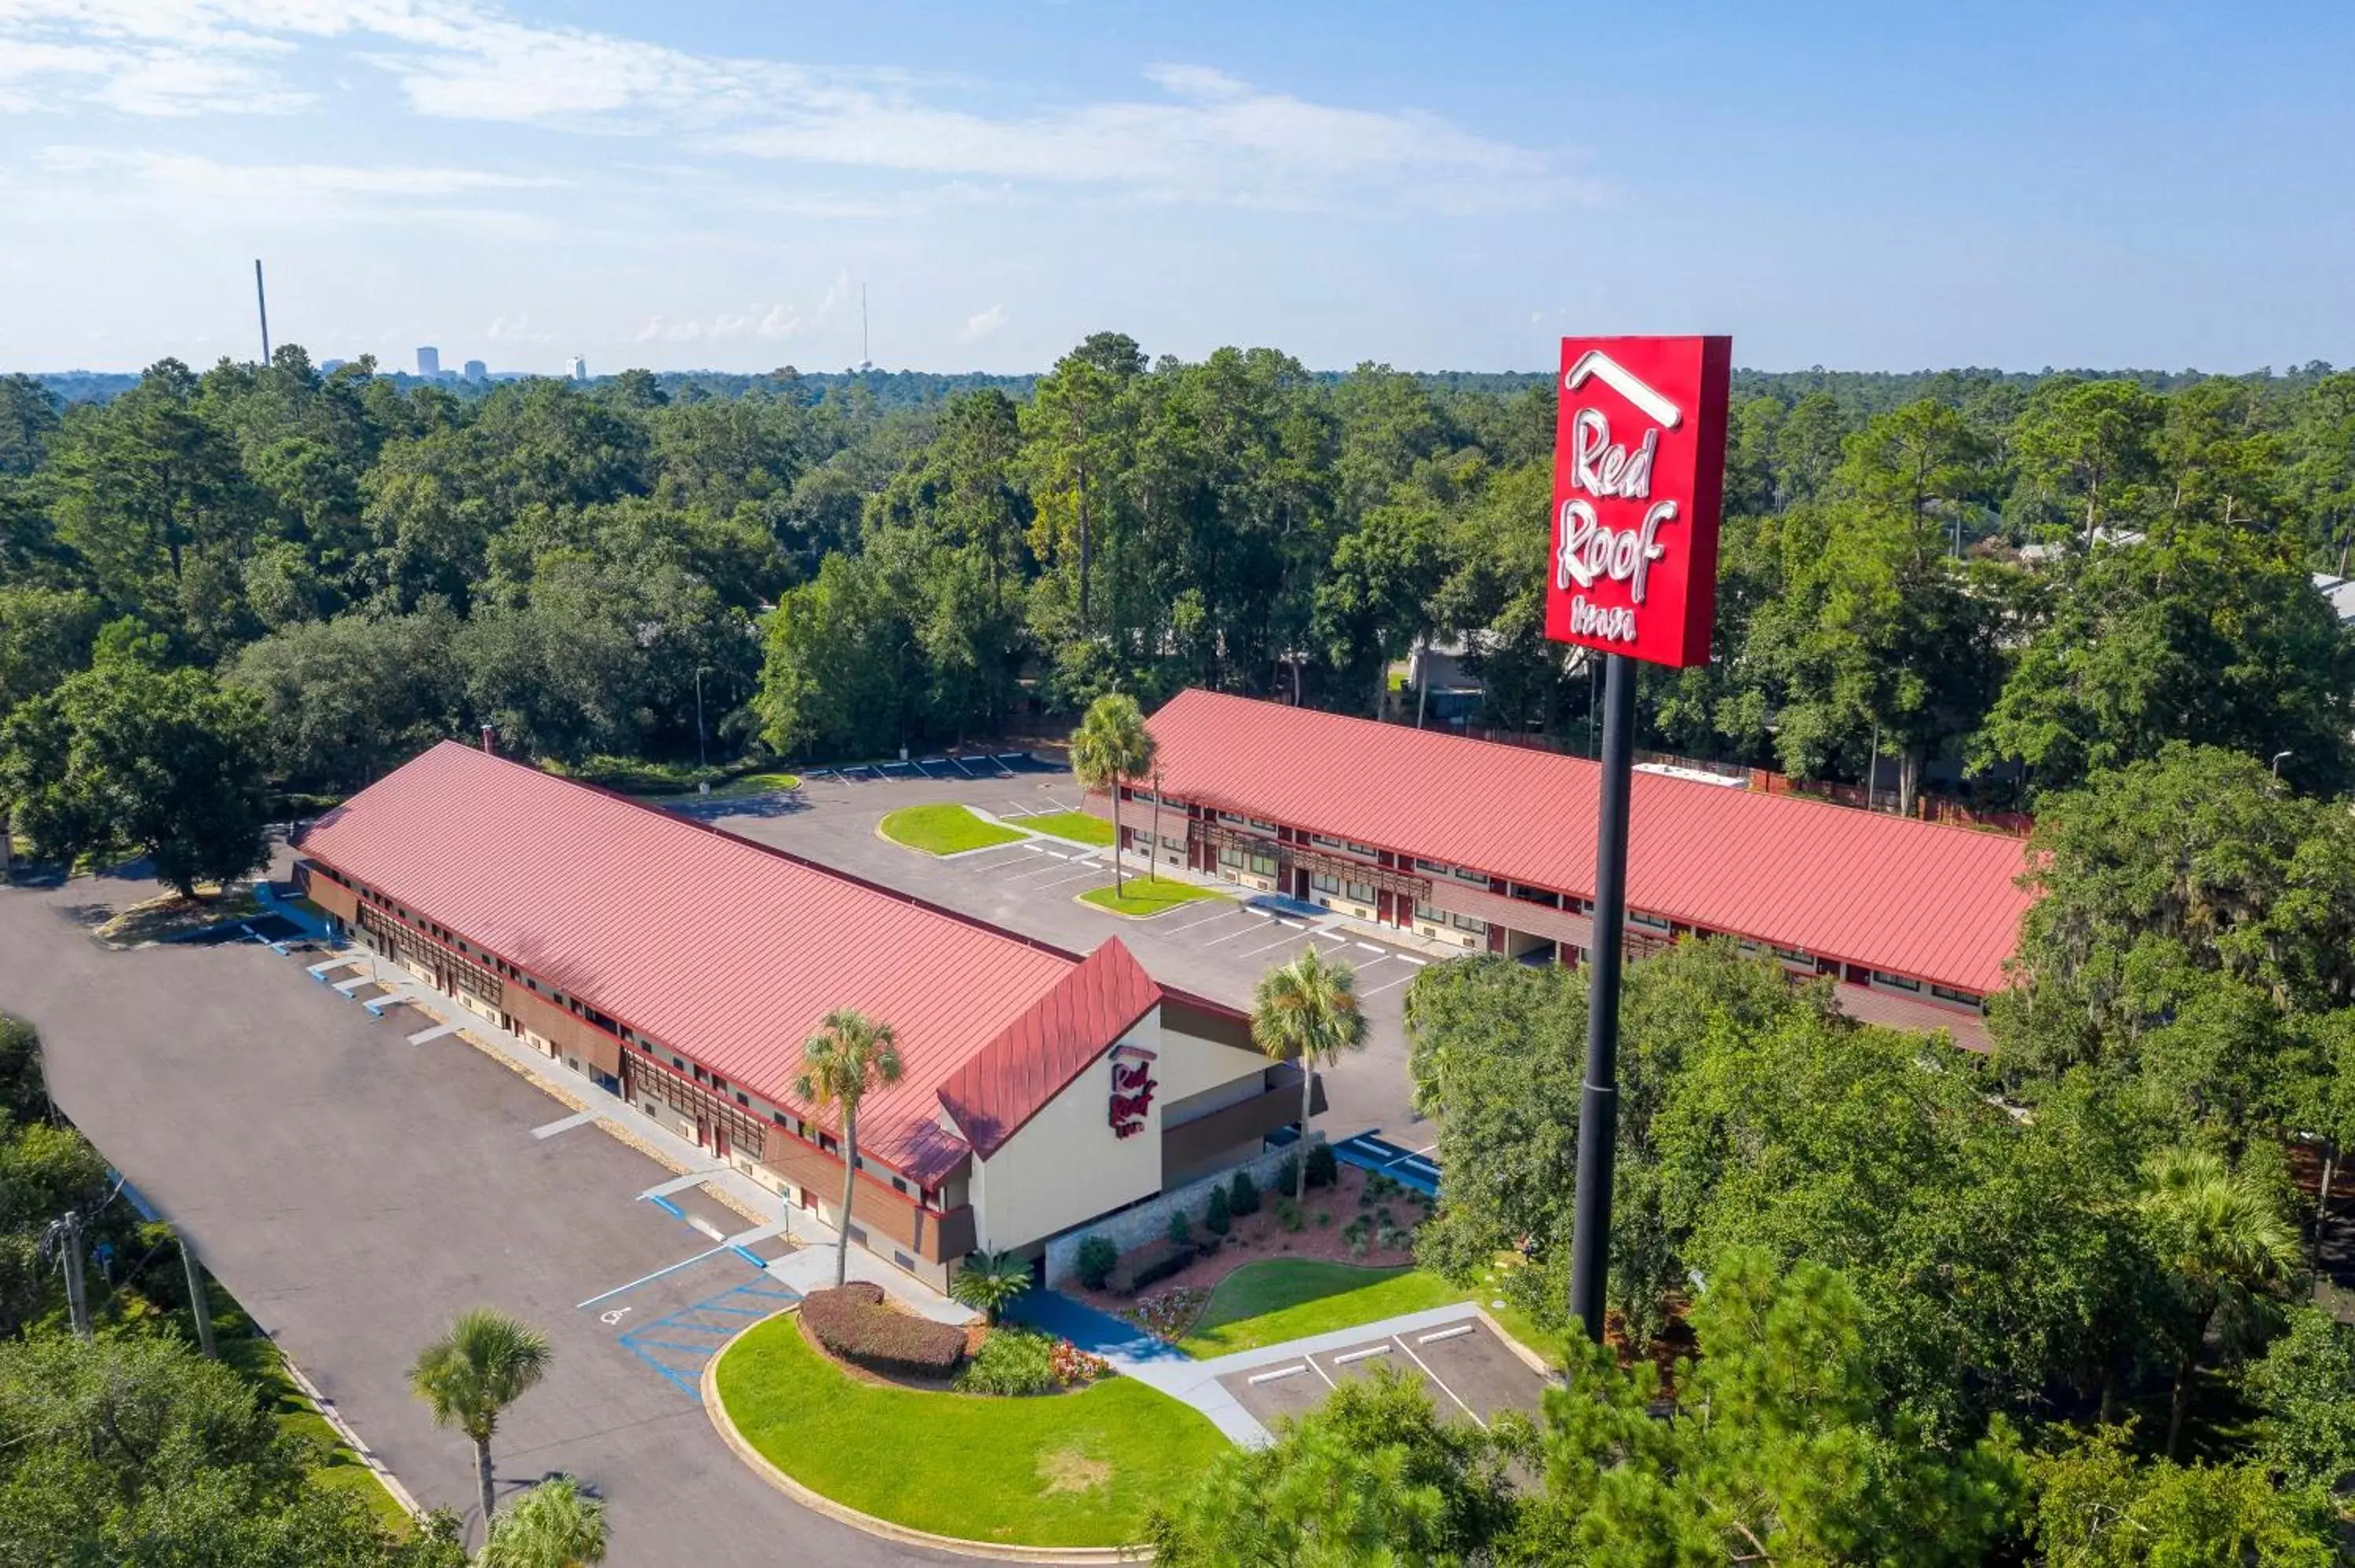 Property building, Bird's-eye View in Red Roof Inn Tallahassee - University